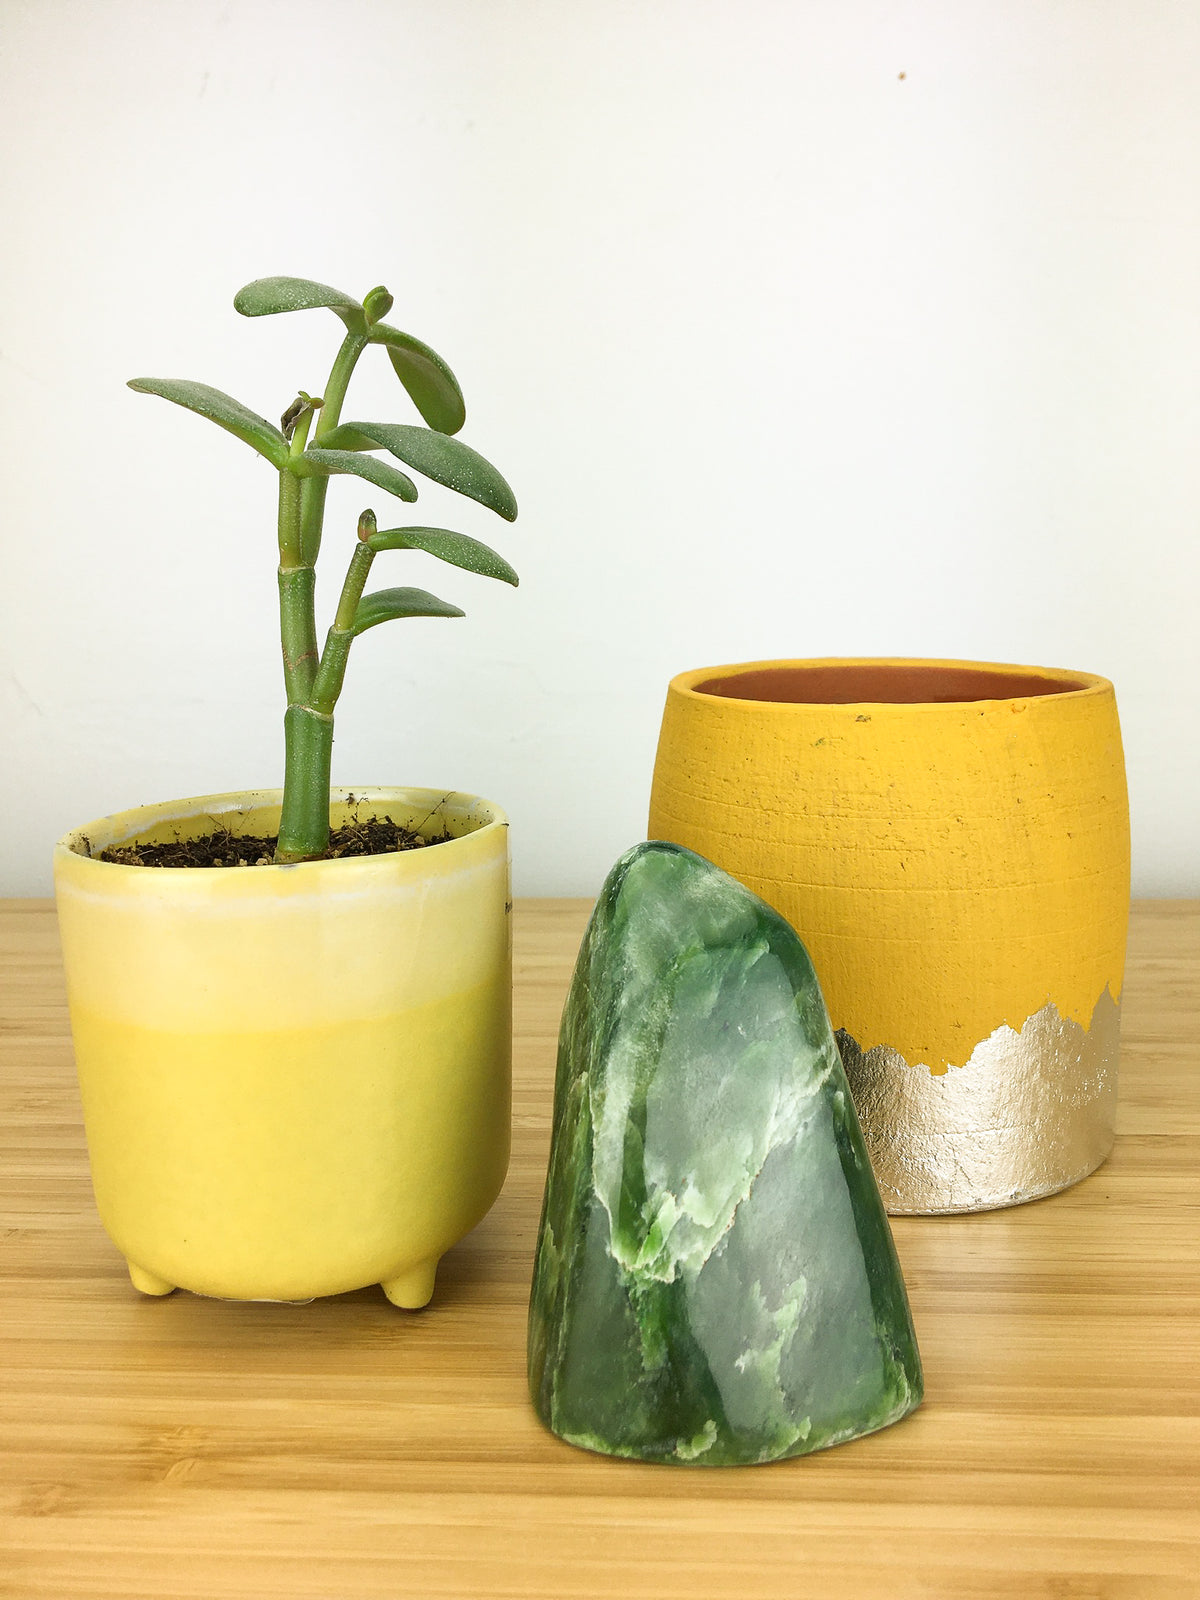 A nephrite jade freeform which is displayed next to a pot plant for scale